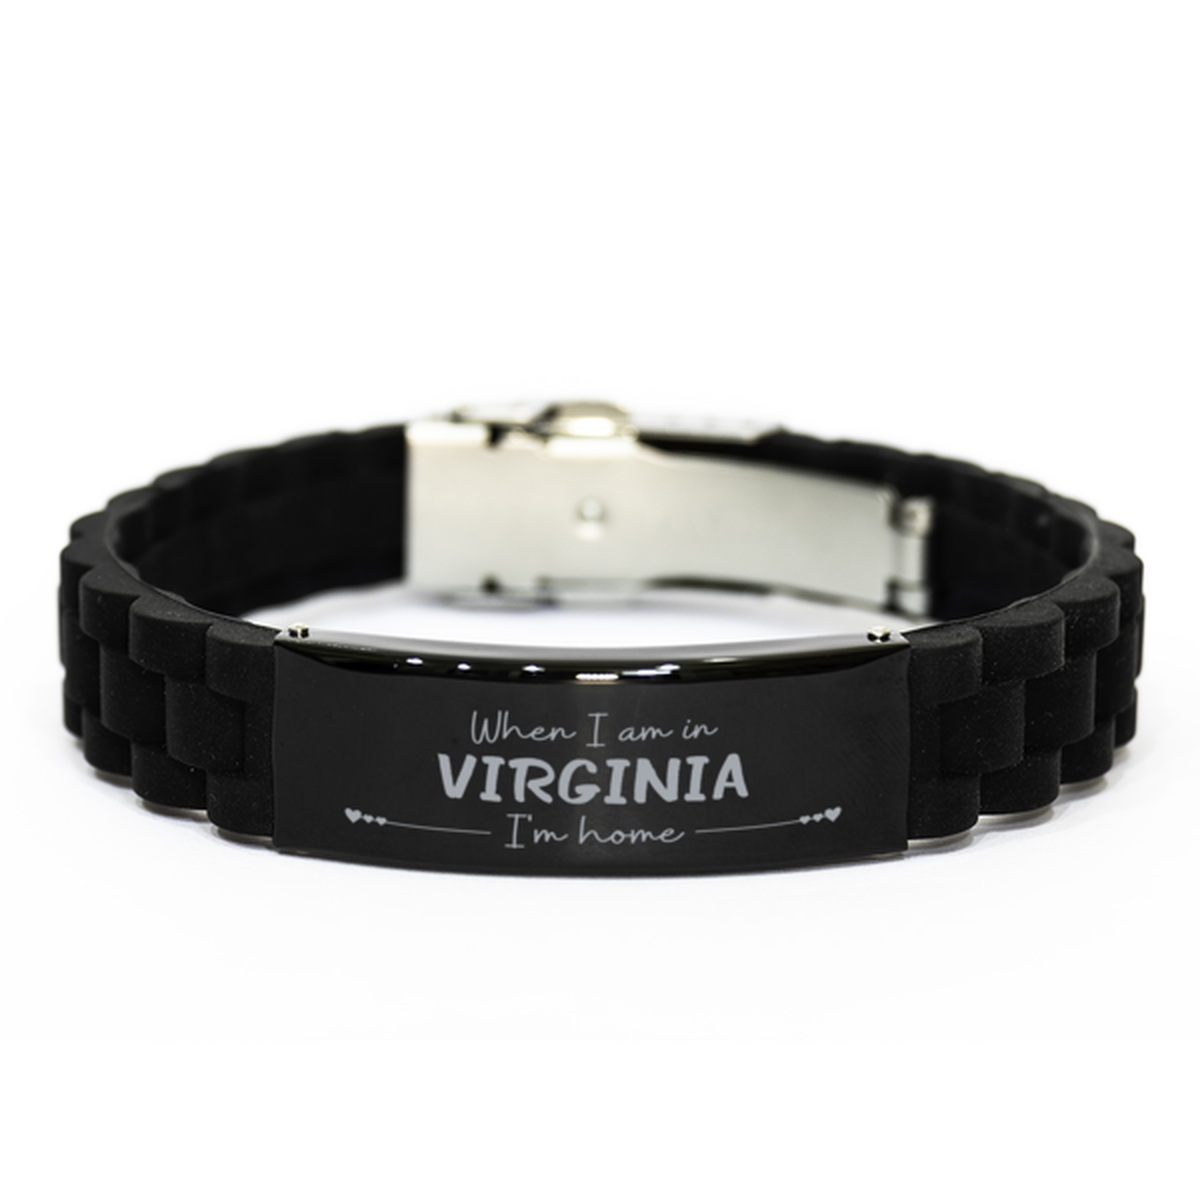 When I am in Virginia I'm home Black Glidelock Clasp Bracelet, Cheap Gifts For Virginia, State Virginia Birthday Gifts for Friends Coworker